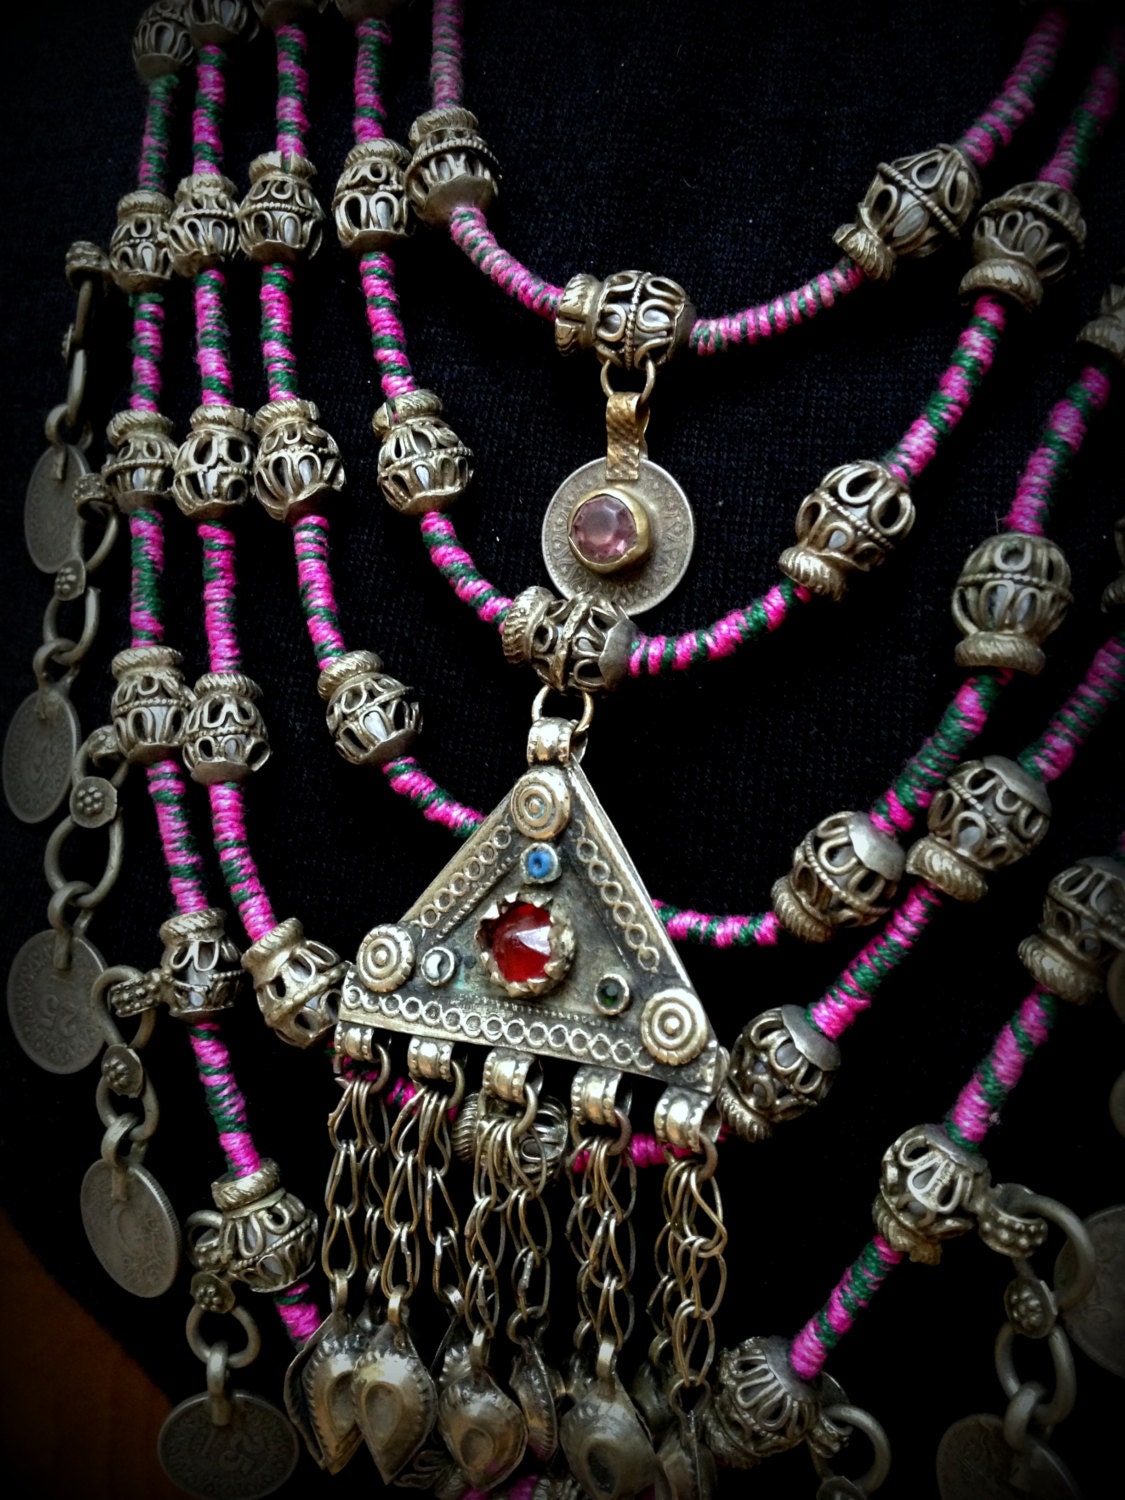 Large Banjara Necklace with Kuchi Pendants and Coins Unusual